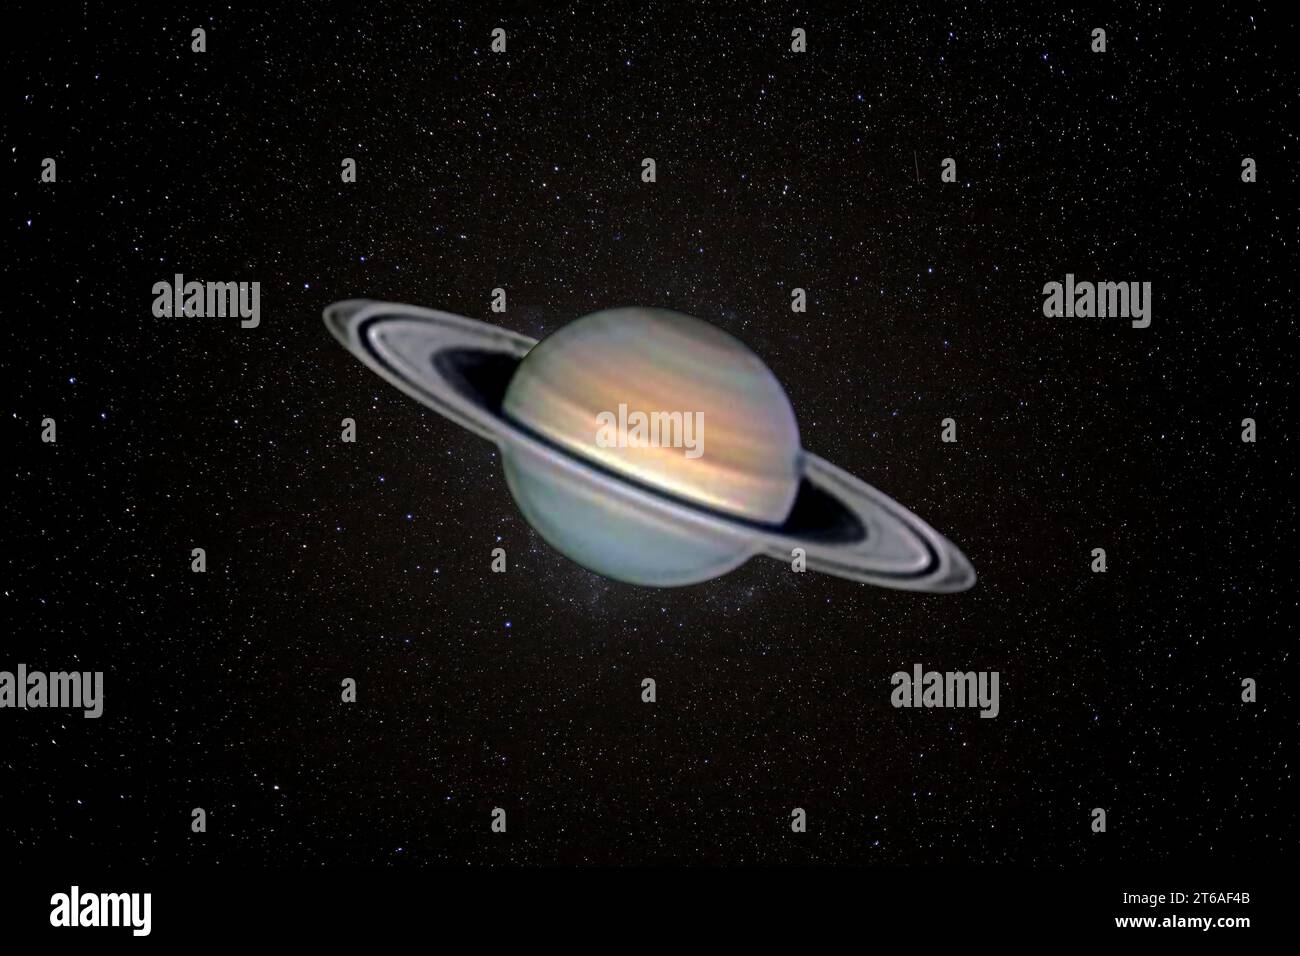 the planet Saturn photographed with an amateur telescope Stock Photo